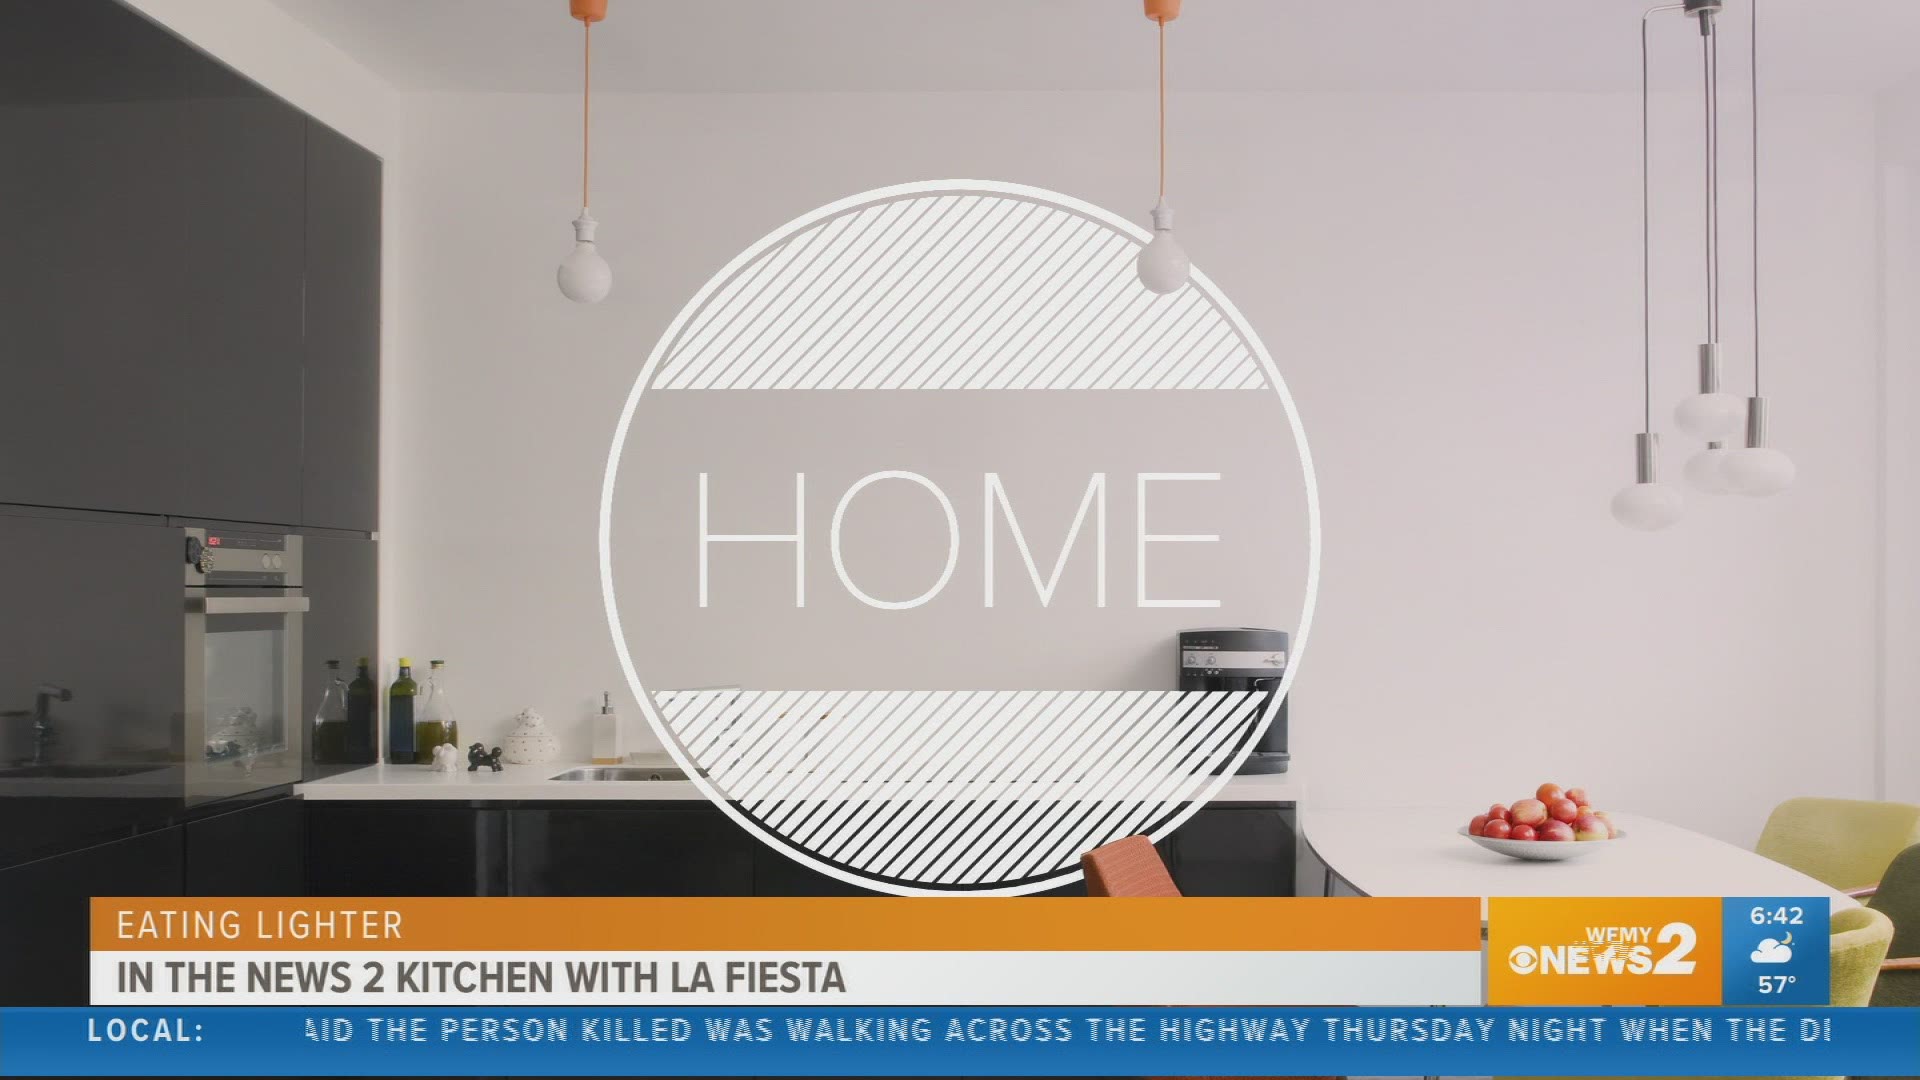 In The News 2 Kitchen With La Fiesta